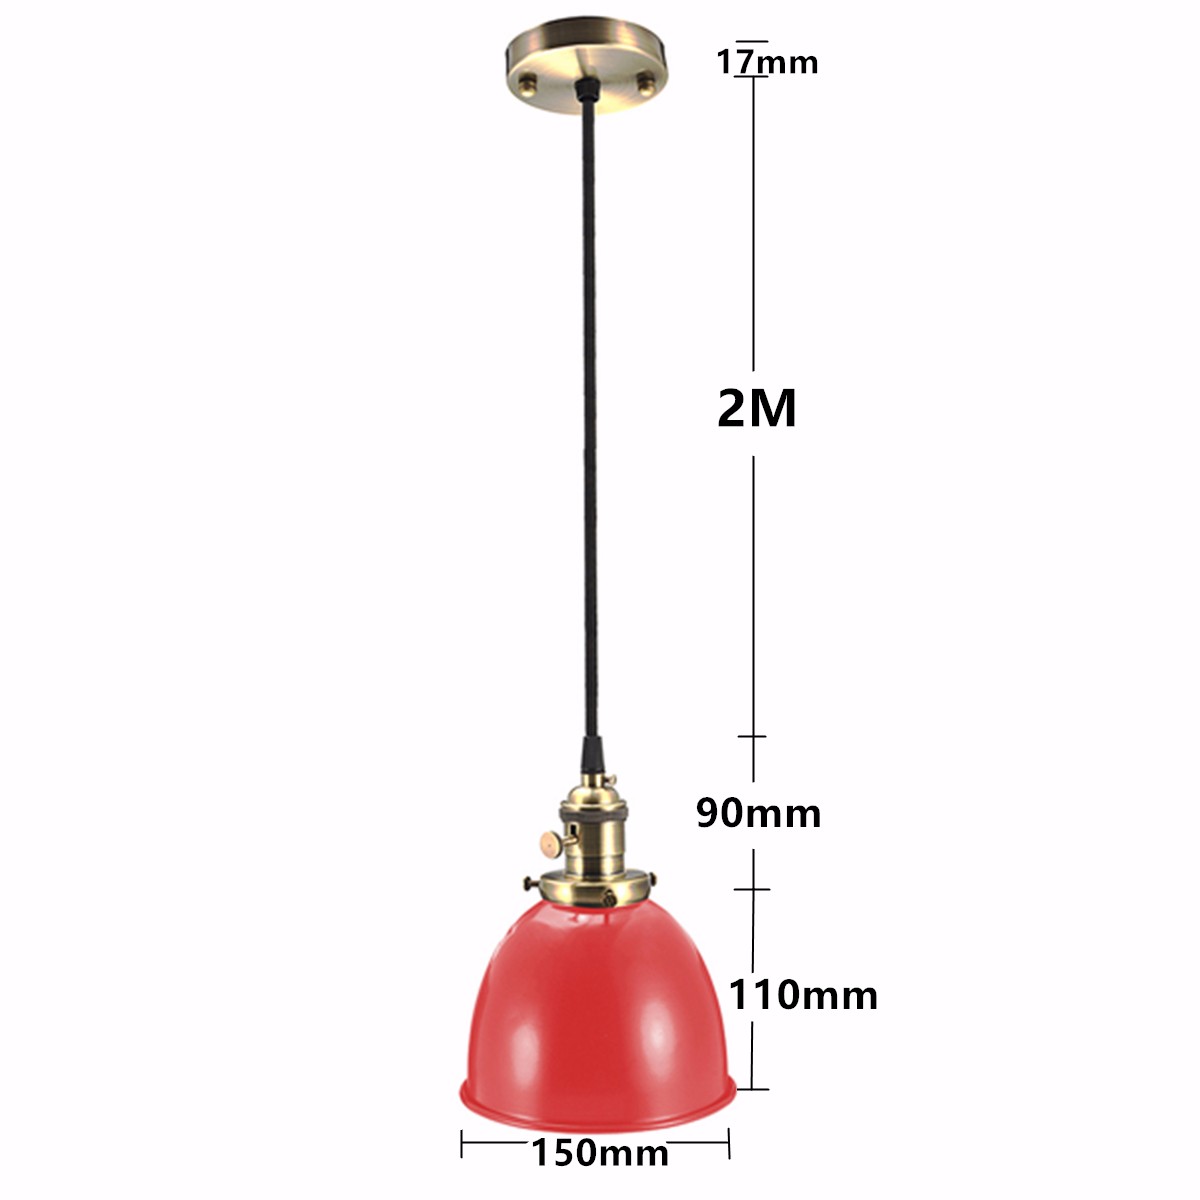 Find Elfeland Cafe Style Retro Ceiling Light Pendant Metal Shade Modern Rustic Industrial Vintage Look E27 Socket Height adjustable Lampshade for Loft Bar Cafe Light Ceiling Lamp Shade for Sale on Gipsybee.com with cryptocurrencies